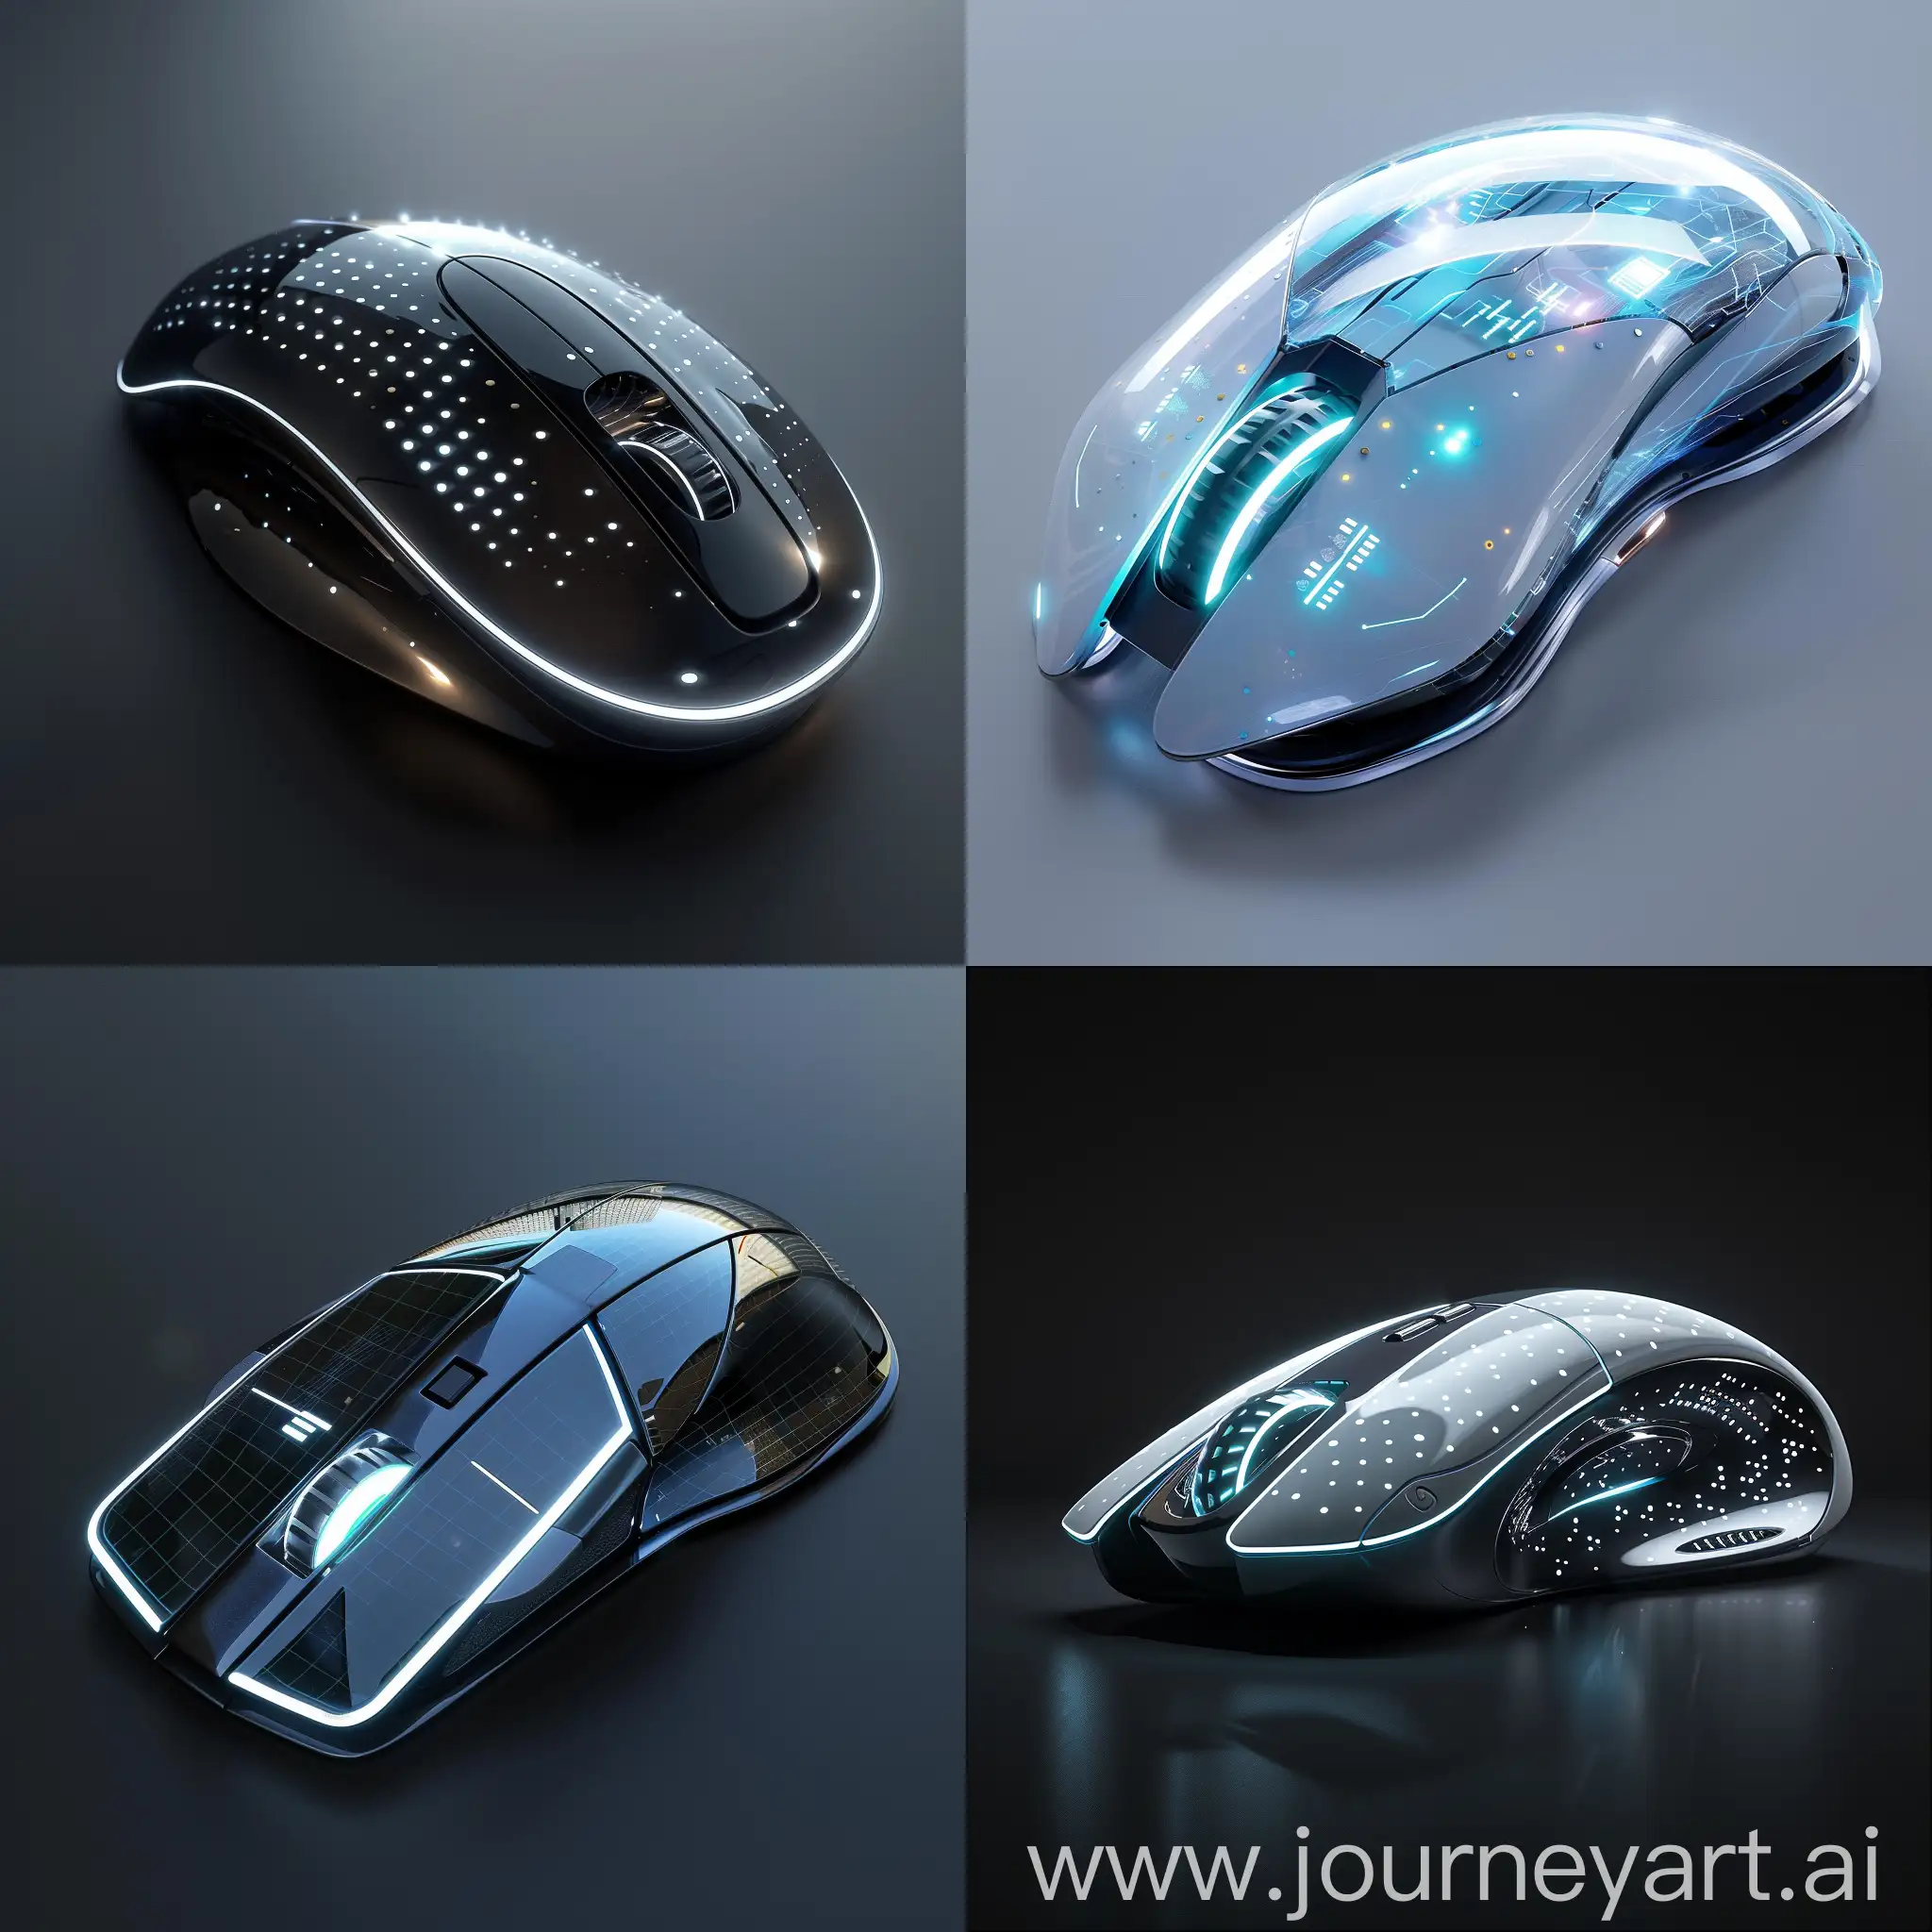 Sci-Fi PC mouse, Advanced Science and Technology, Advanced, AI-Powered Customization, Haptic Feedback, Gesture Control, OLED Touch Display, Wireless Charging, Modular Design, Environmental Sensors, Advanced Optical Tracking, Voice Command Integration, Biometric Security, Ergonomic Adaptive Shape, Transparent OLED Body. Solar Panel Surface, Magnetic Levitation, Dynamic Surface Texture, Integrated Projector, Retractable USB-C Connector, Ambient Light Sensors, Customizable LED Accents, Water and Dust Resistance, In Unreal Engine 5 Style --stylize 1000